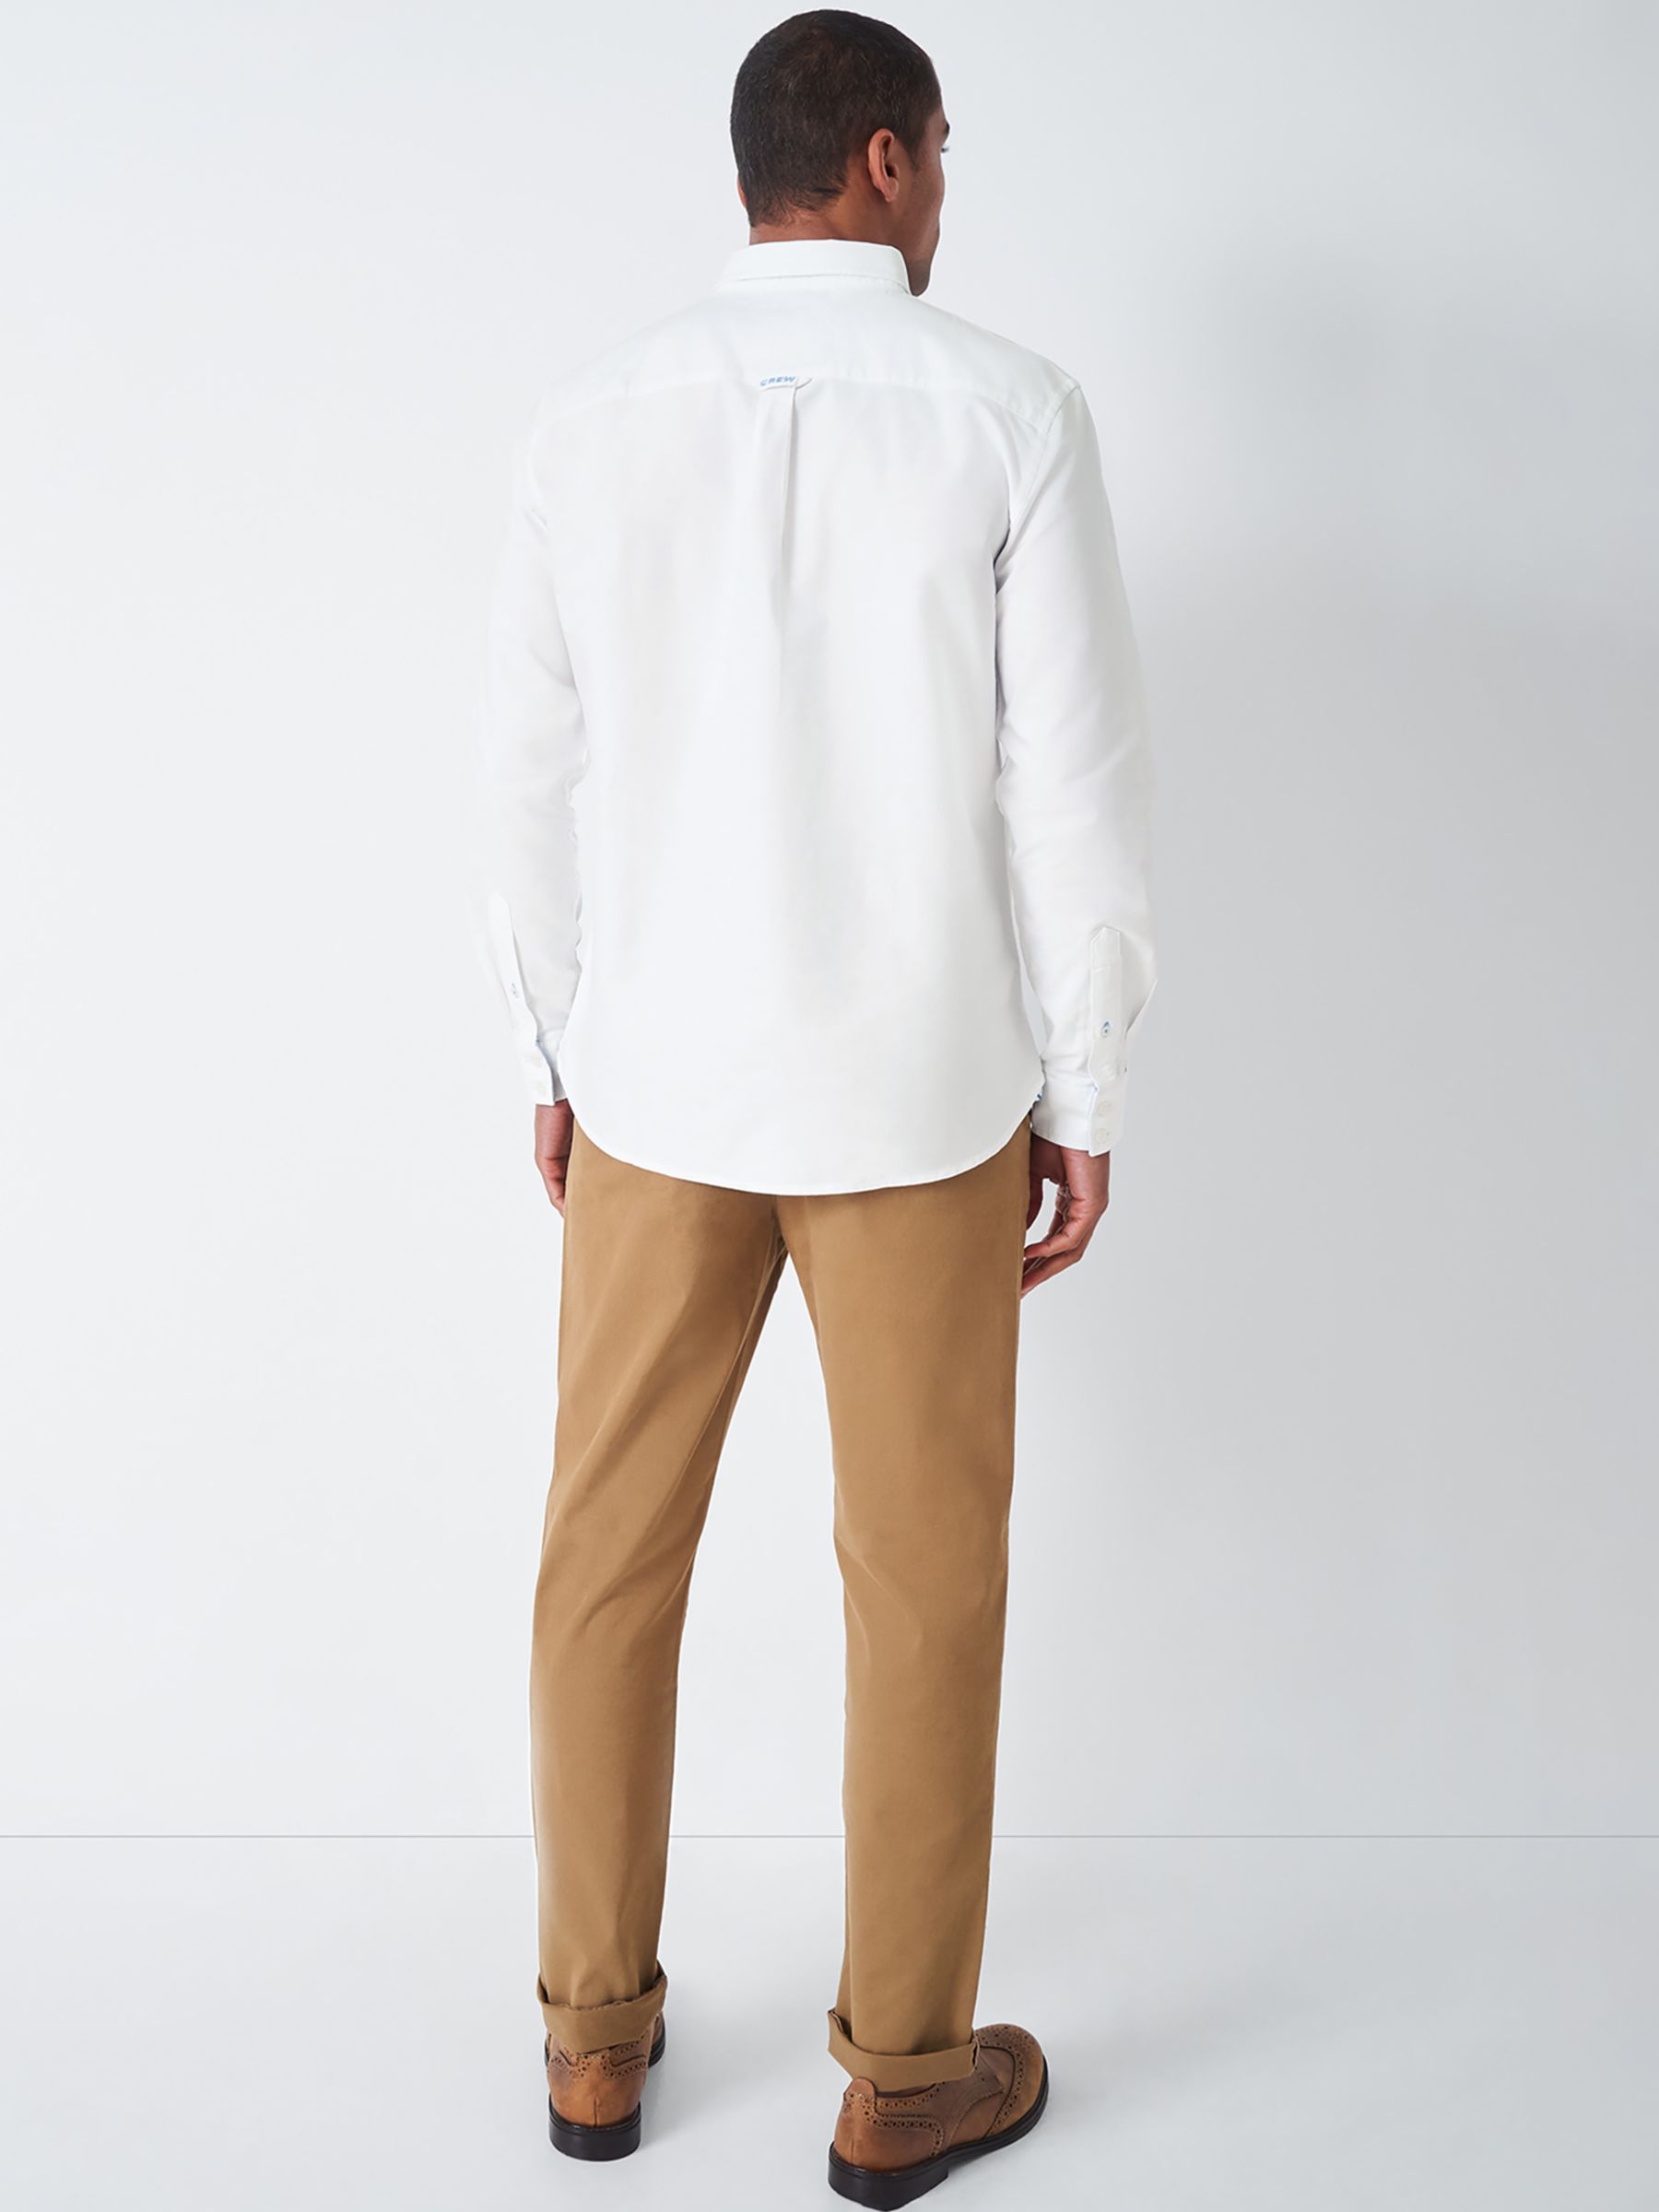 Crew Clothing Classic Fit Oxford Shirt, White at John Lewis & Partners